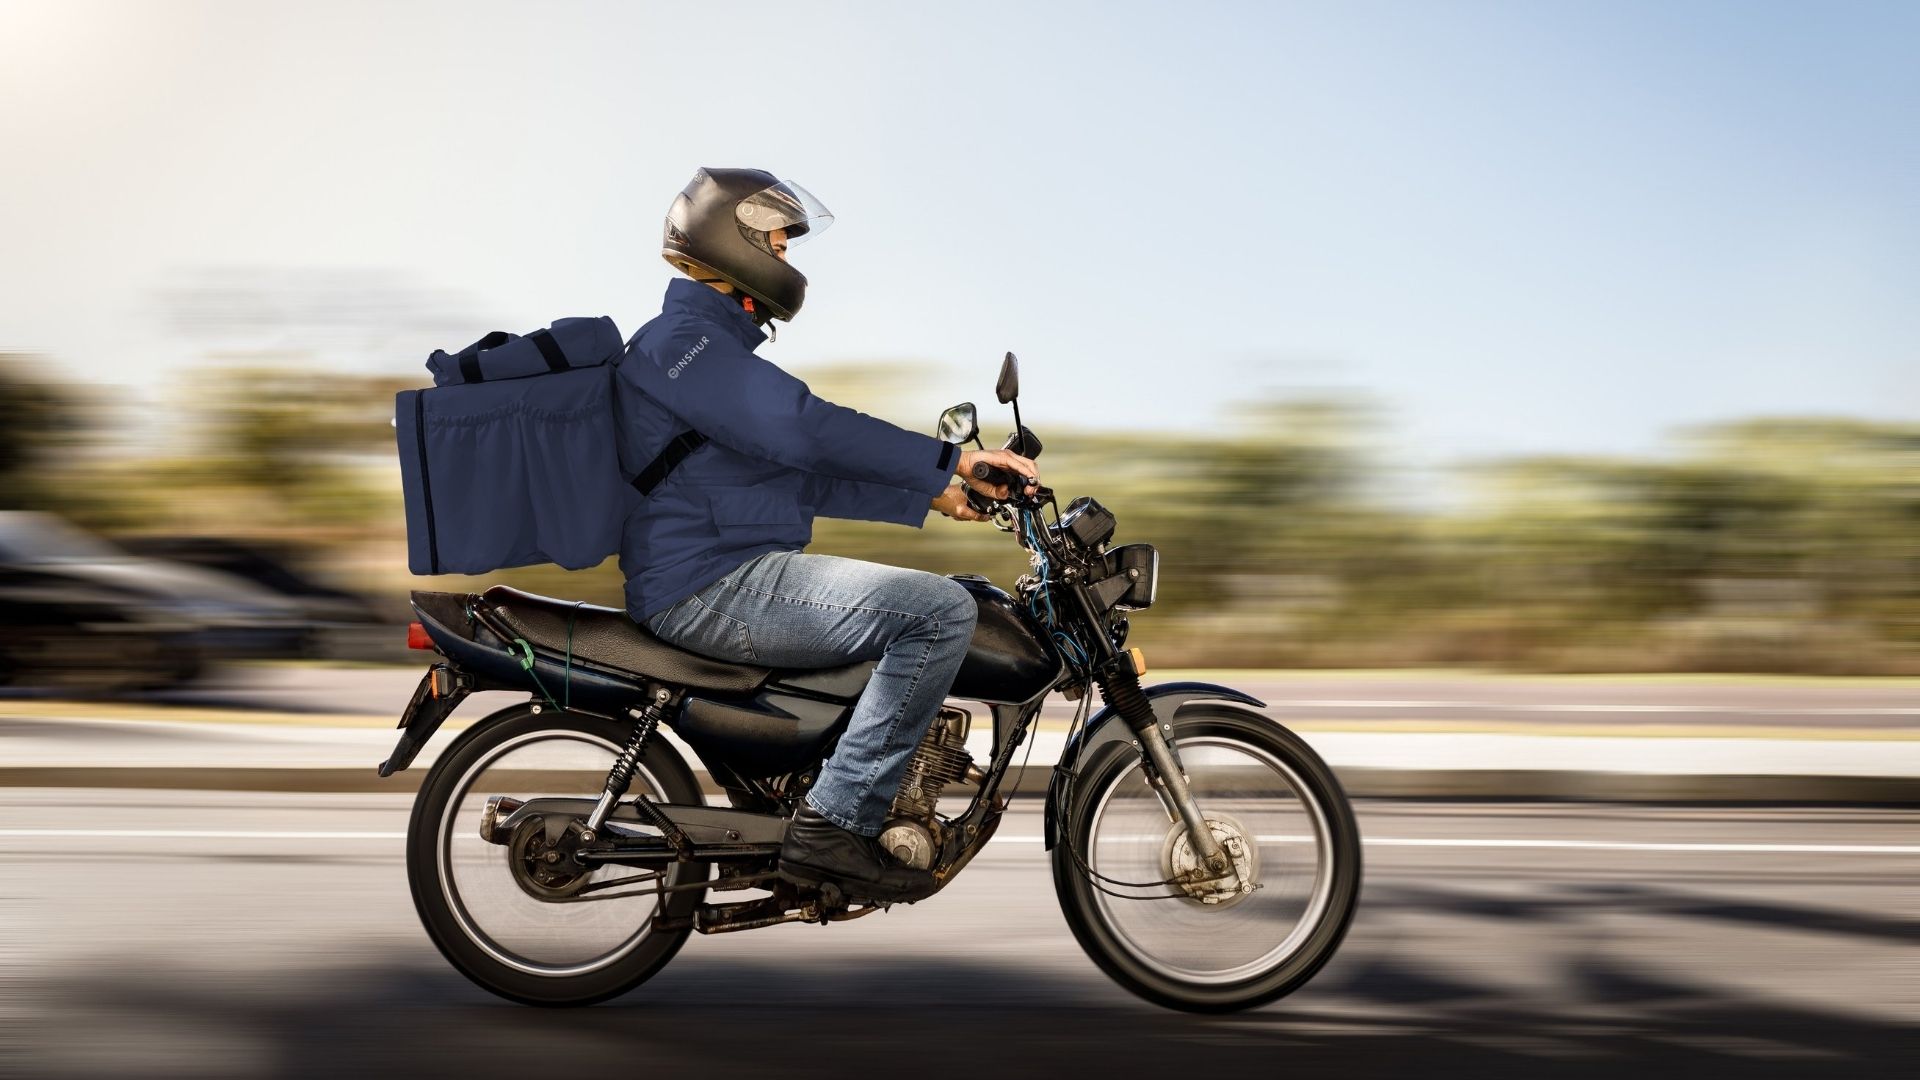 Introducing our new motorcycle insurance cover